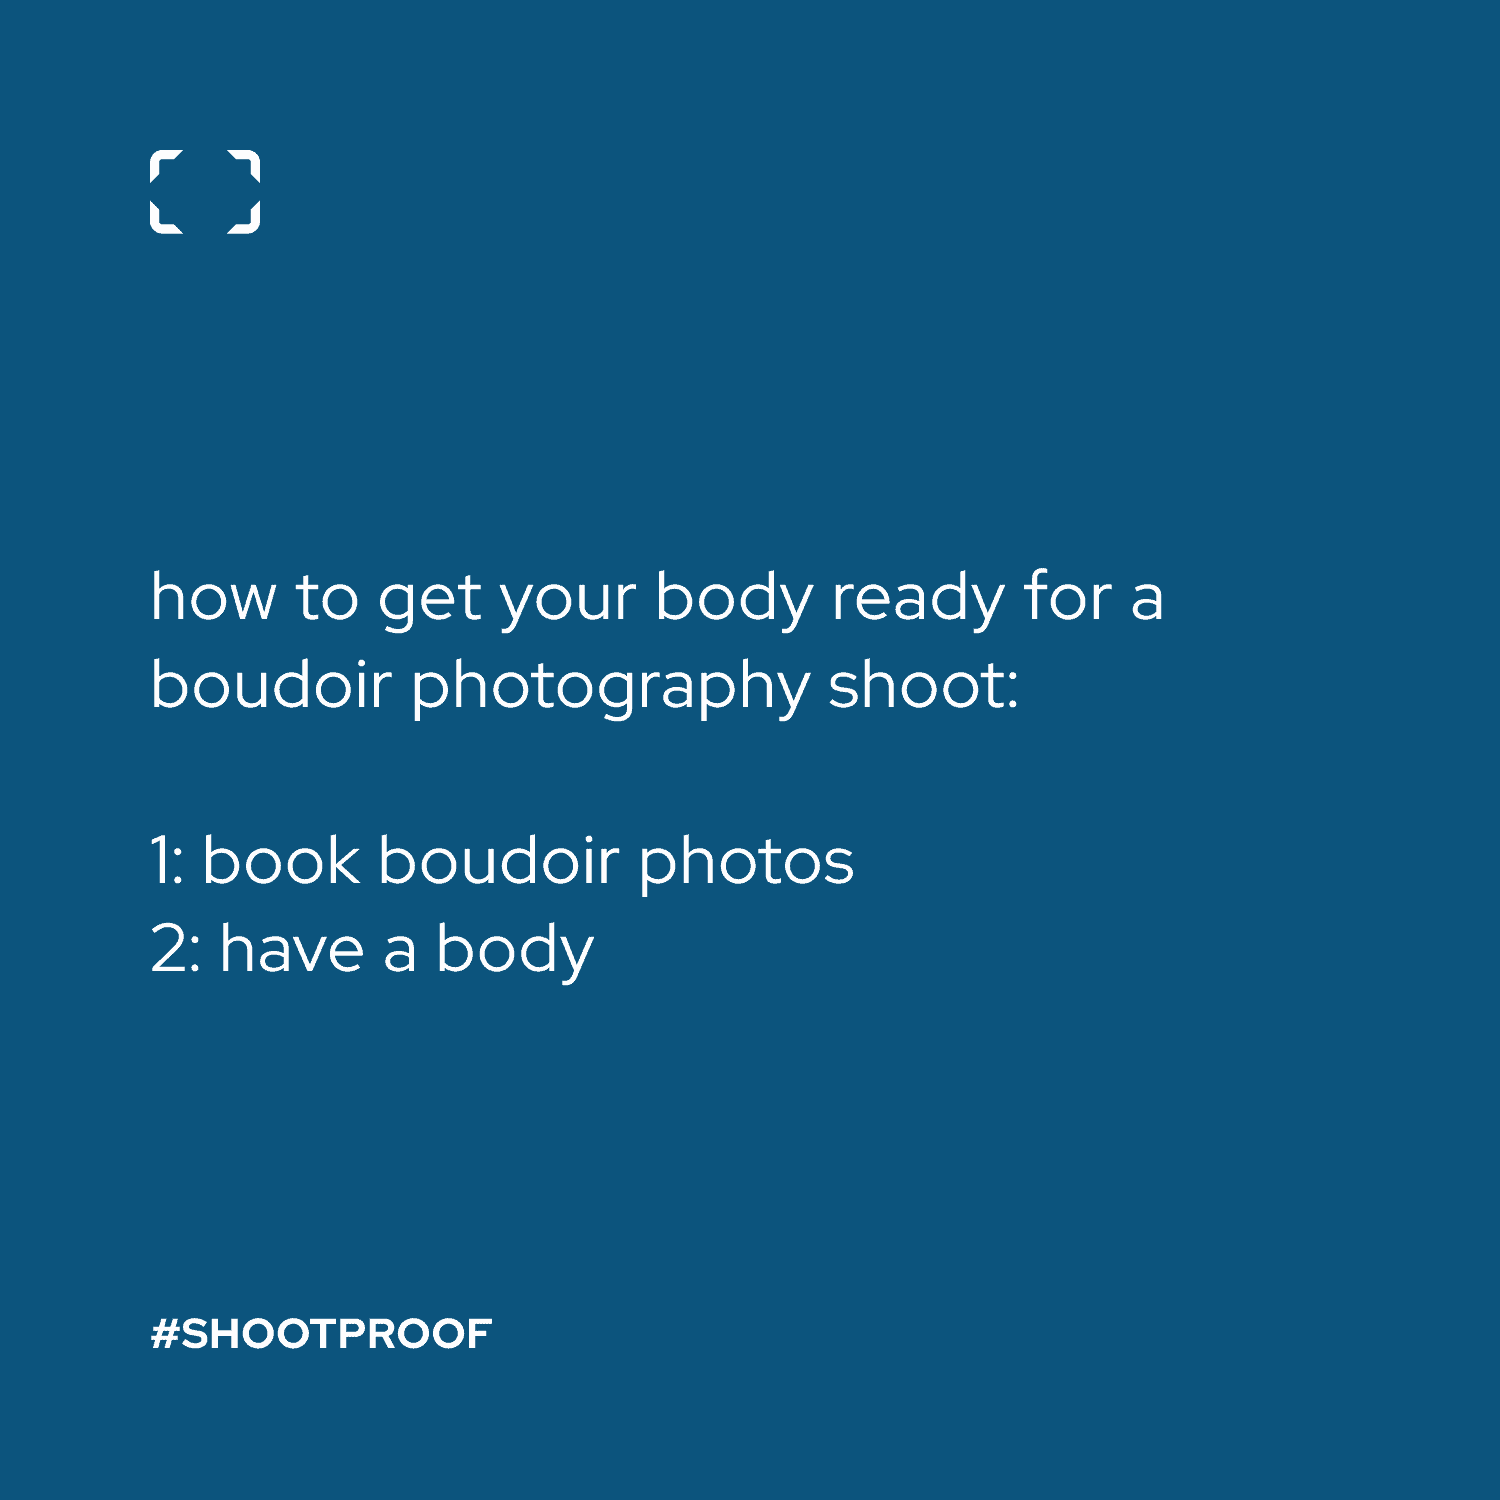 A blue and white graphic displays a meme created by ShootProof. It says: "How to get your body ready for a boudoir photography shoot: 1 - book boudoir photos; 2 - have a body"